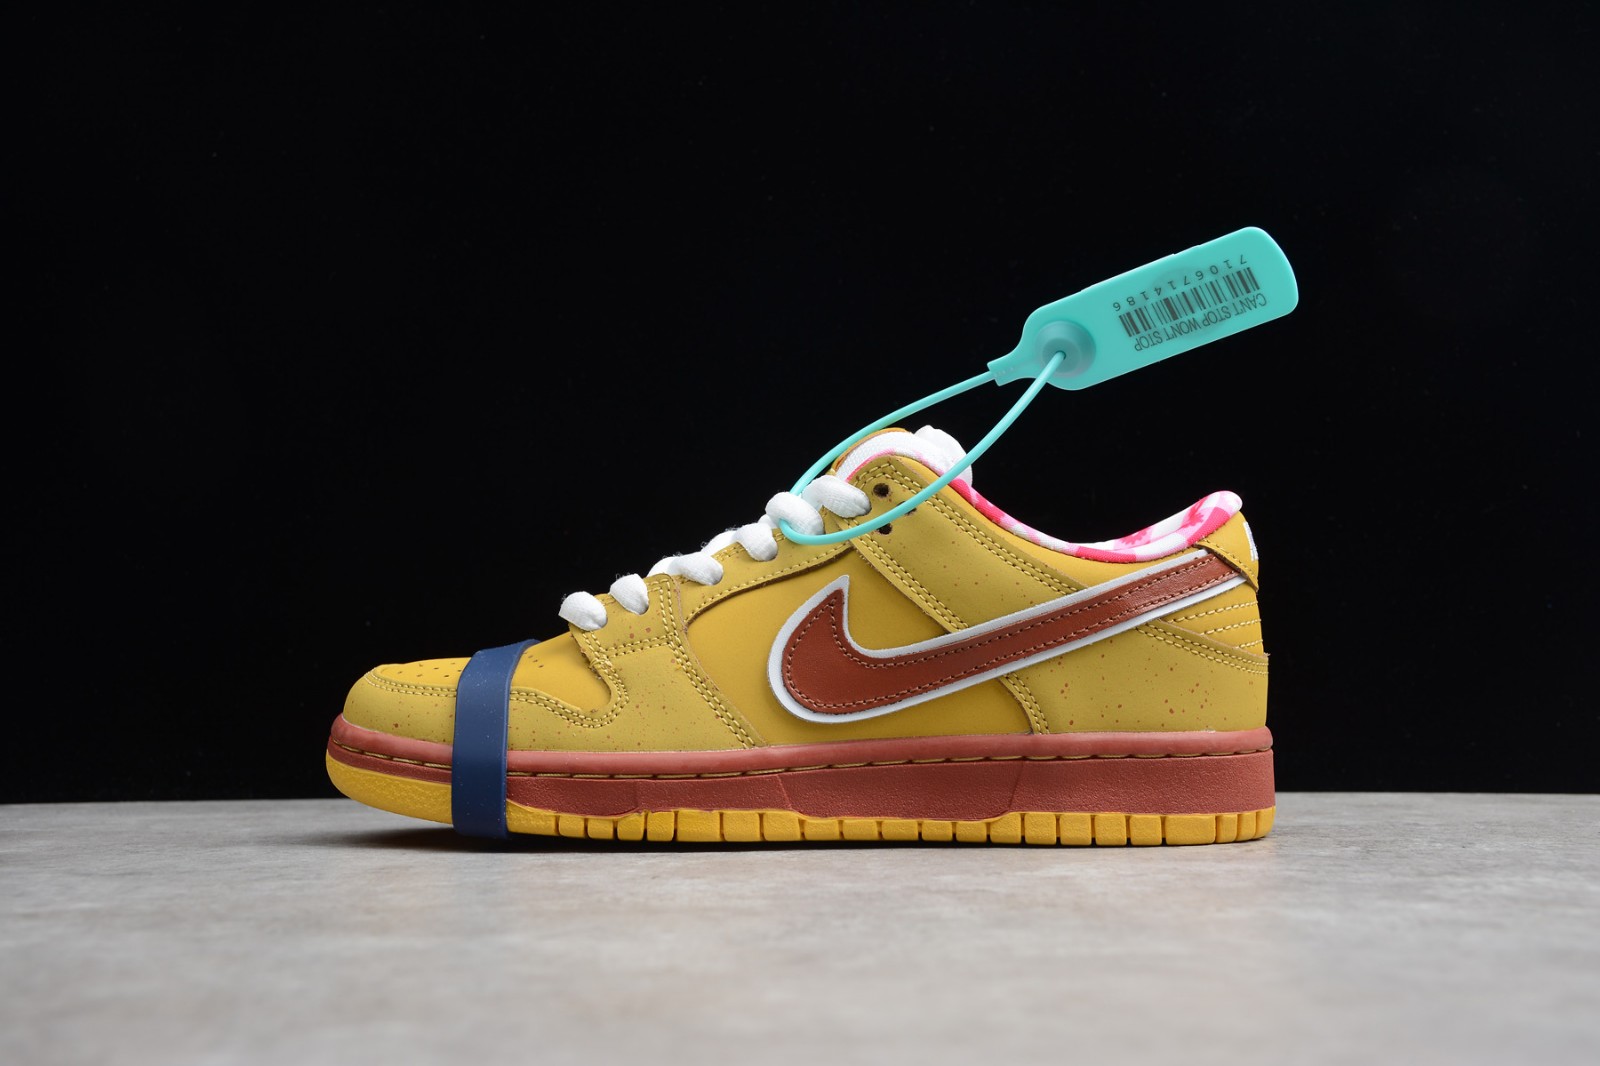 todo lo mejor Mareo Mantenimiento 137 - GmarShops - nike jordans with pink cost on sale today images - Nike  Dunk SB Low Premium Yellow Lobster 313170